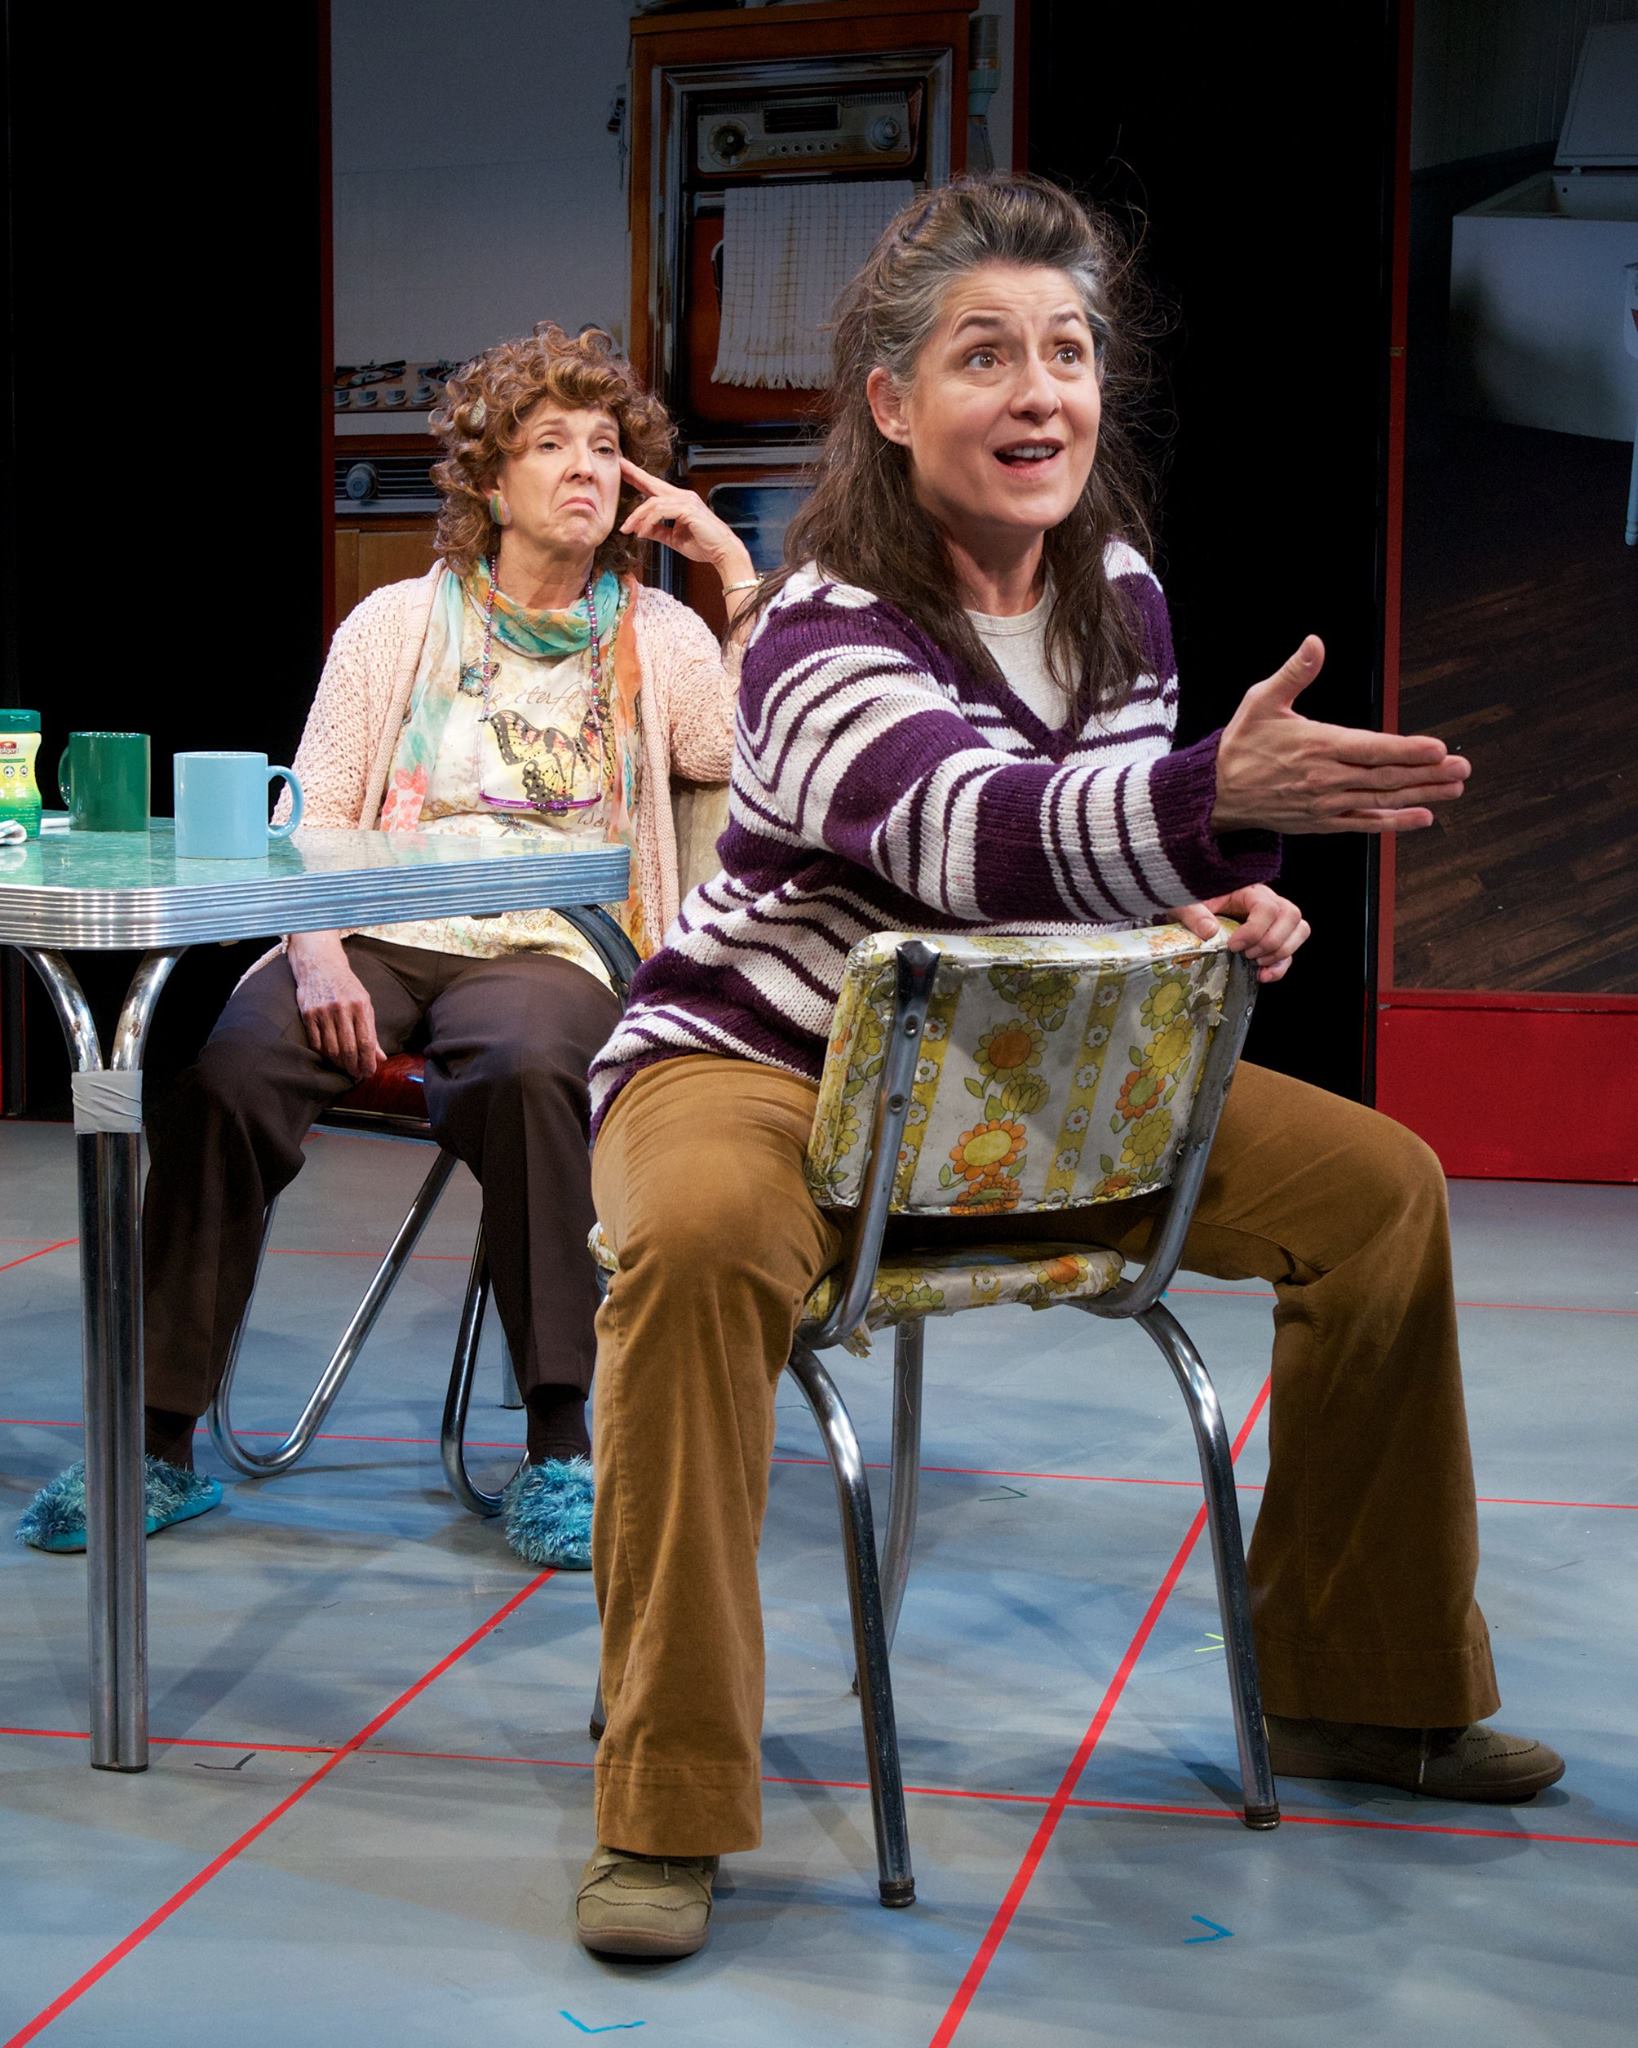 Cathy Dresbach and Maria Amorocho in "Good People" at Actors Theatre of Phoenix, May 2014 (Photo by John Groseclose)